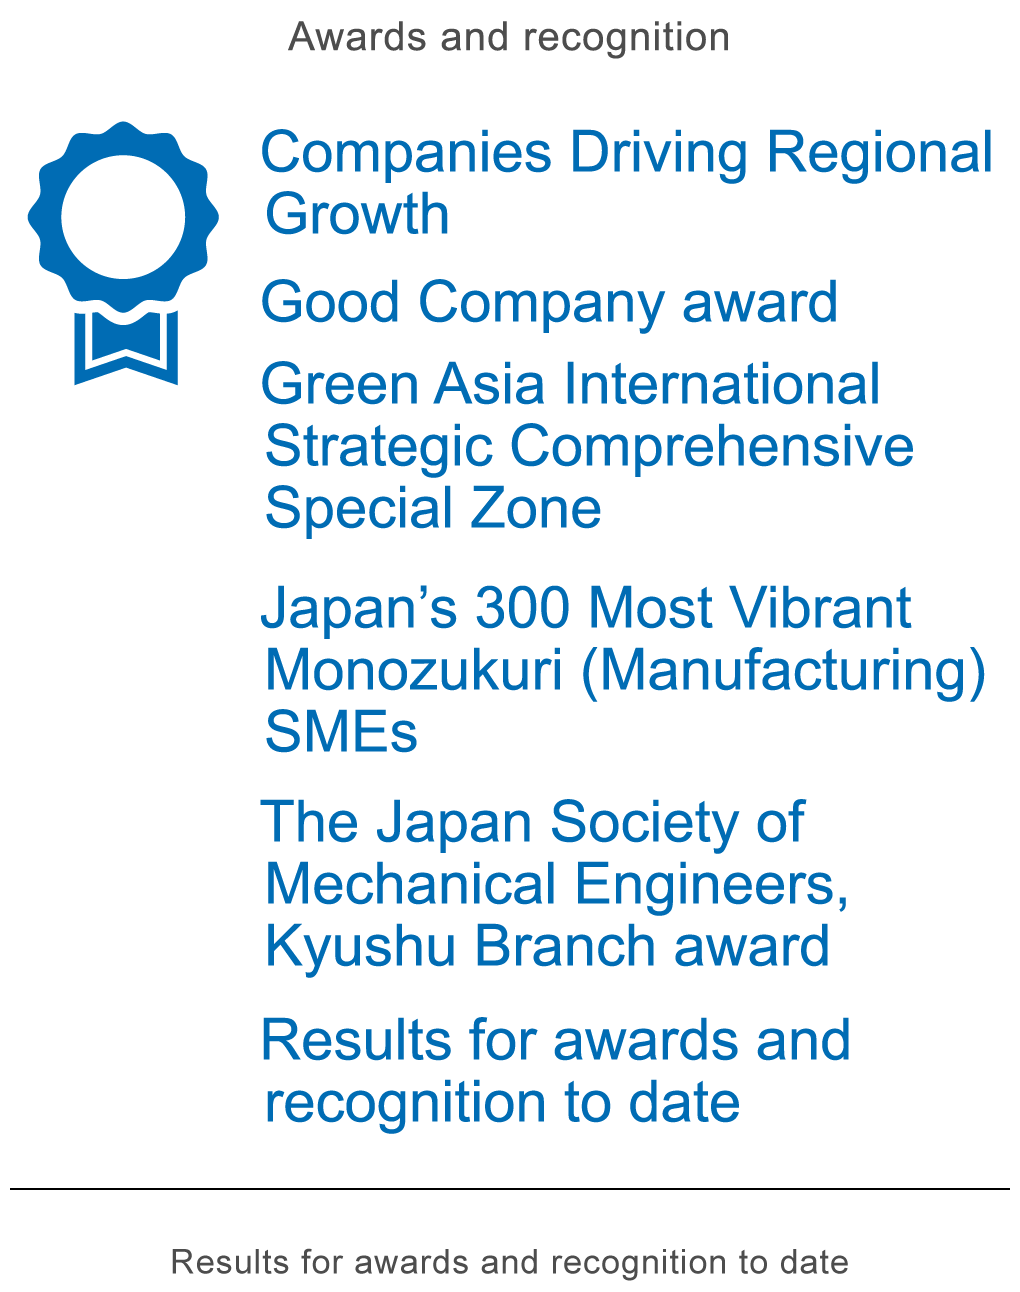 Awards and recognition Companies Driving Regional Growth Good Company award Green Asia International Strategic Comprehensive Special Zone Japan’s 300 Most Vibrant Monozukuri (Manufacturing) SMEs The Japan Society of Mechanical Engineers, Kyushu Branch award Results for awards and recognition to date